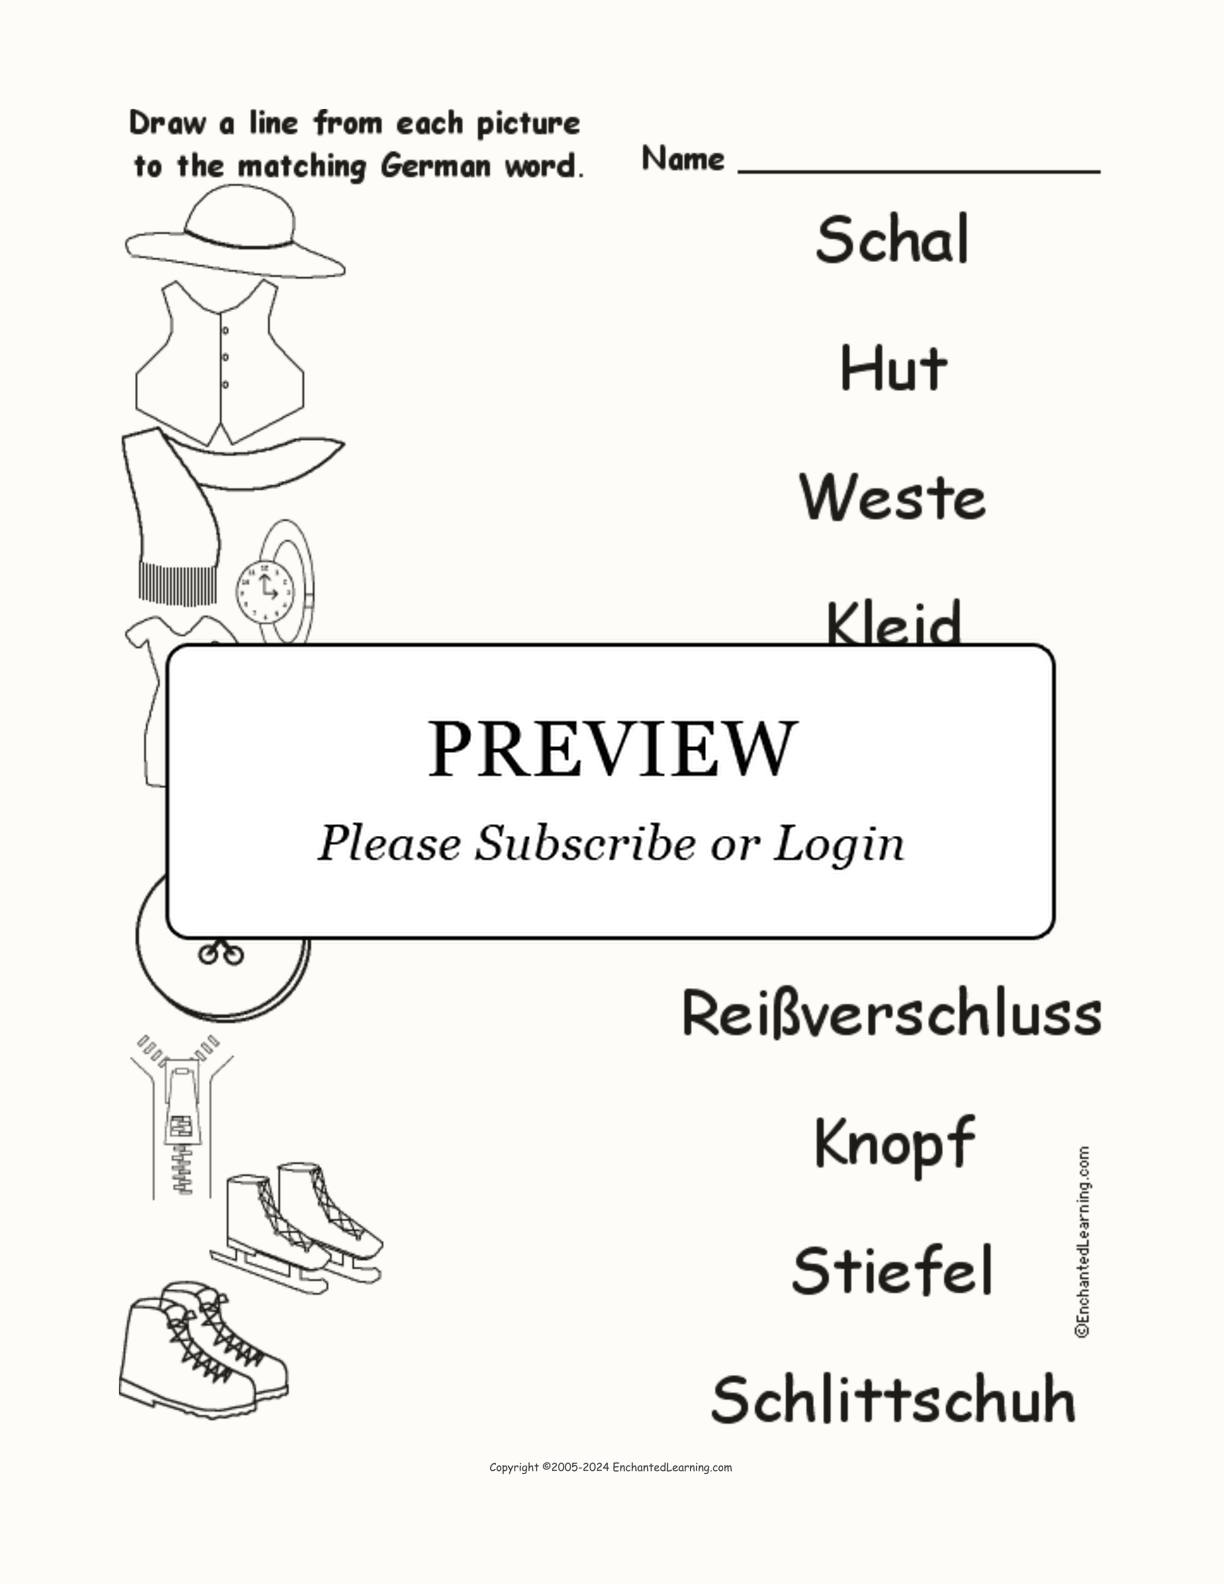 Match the German Clothing Words to the Pictures #2 interactive worksheet page 1